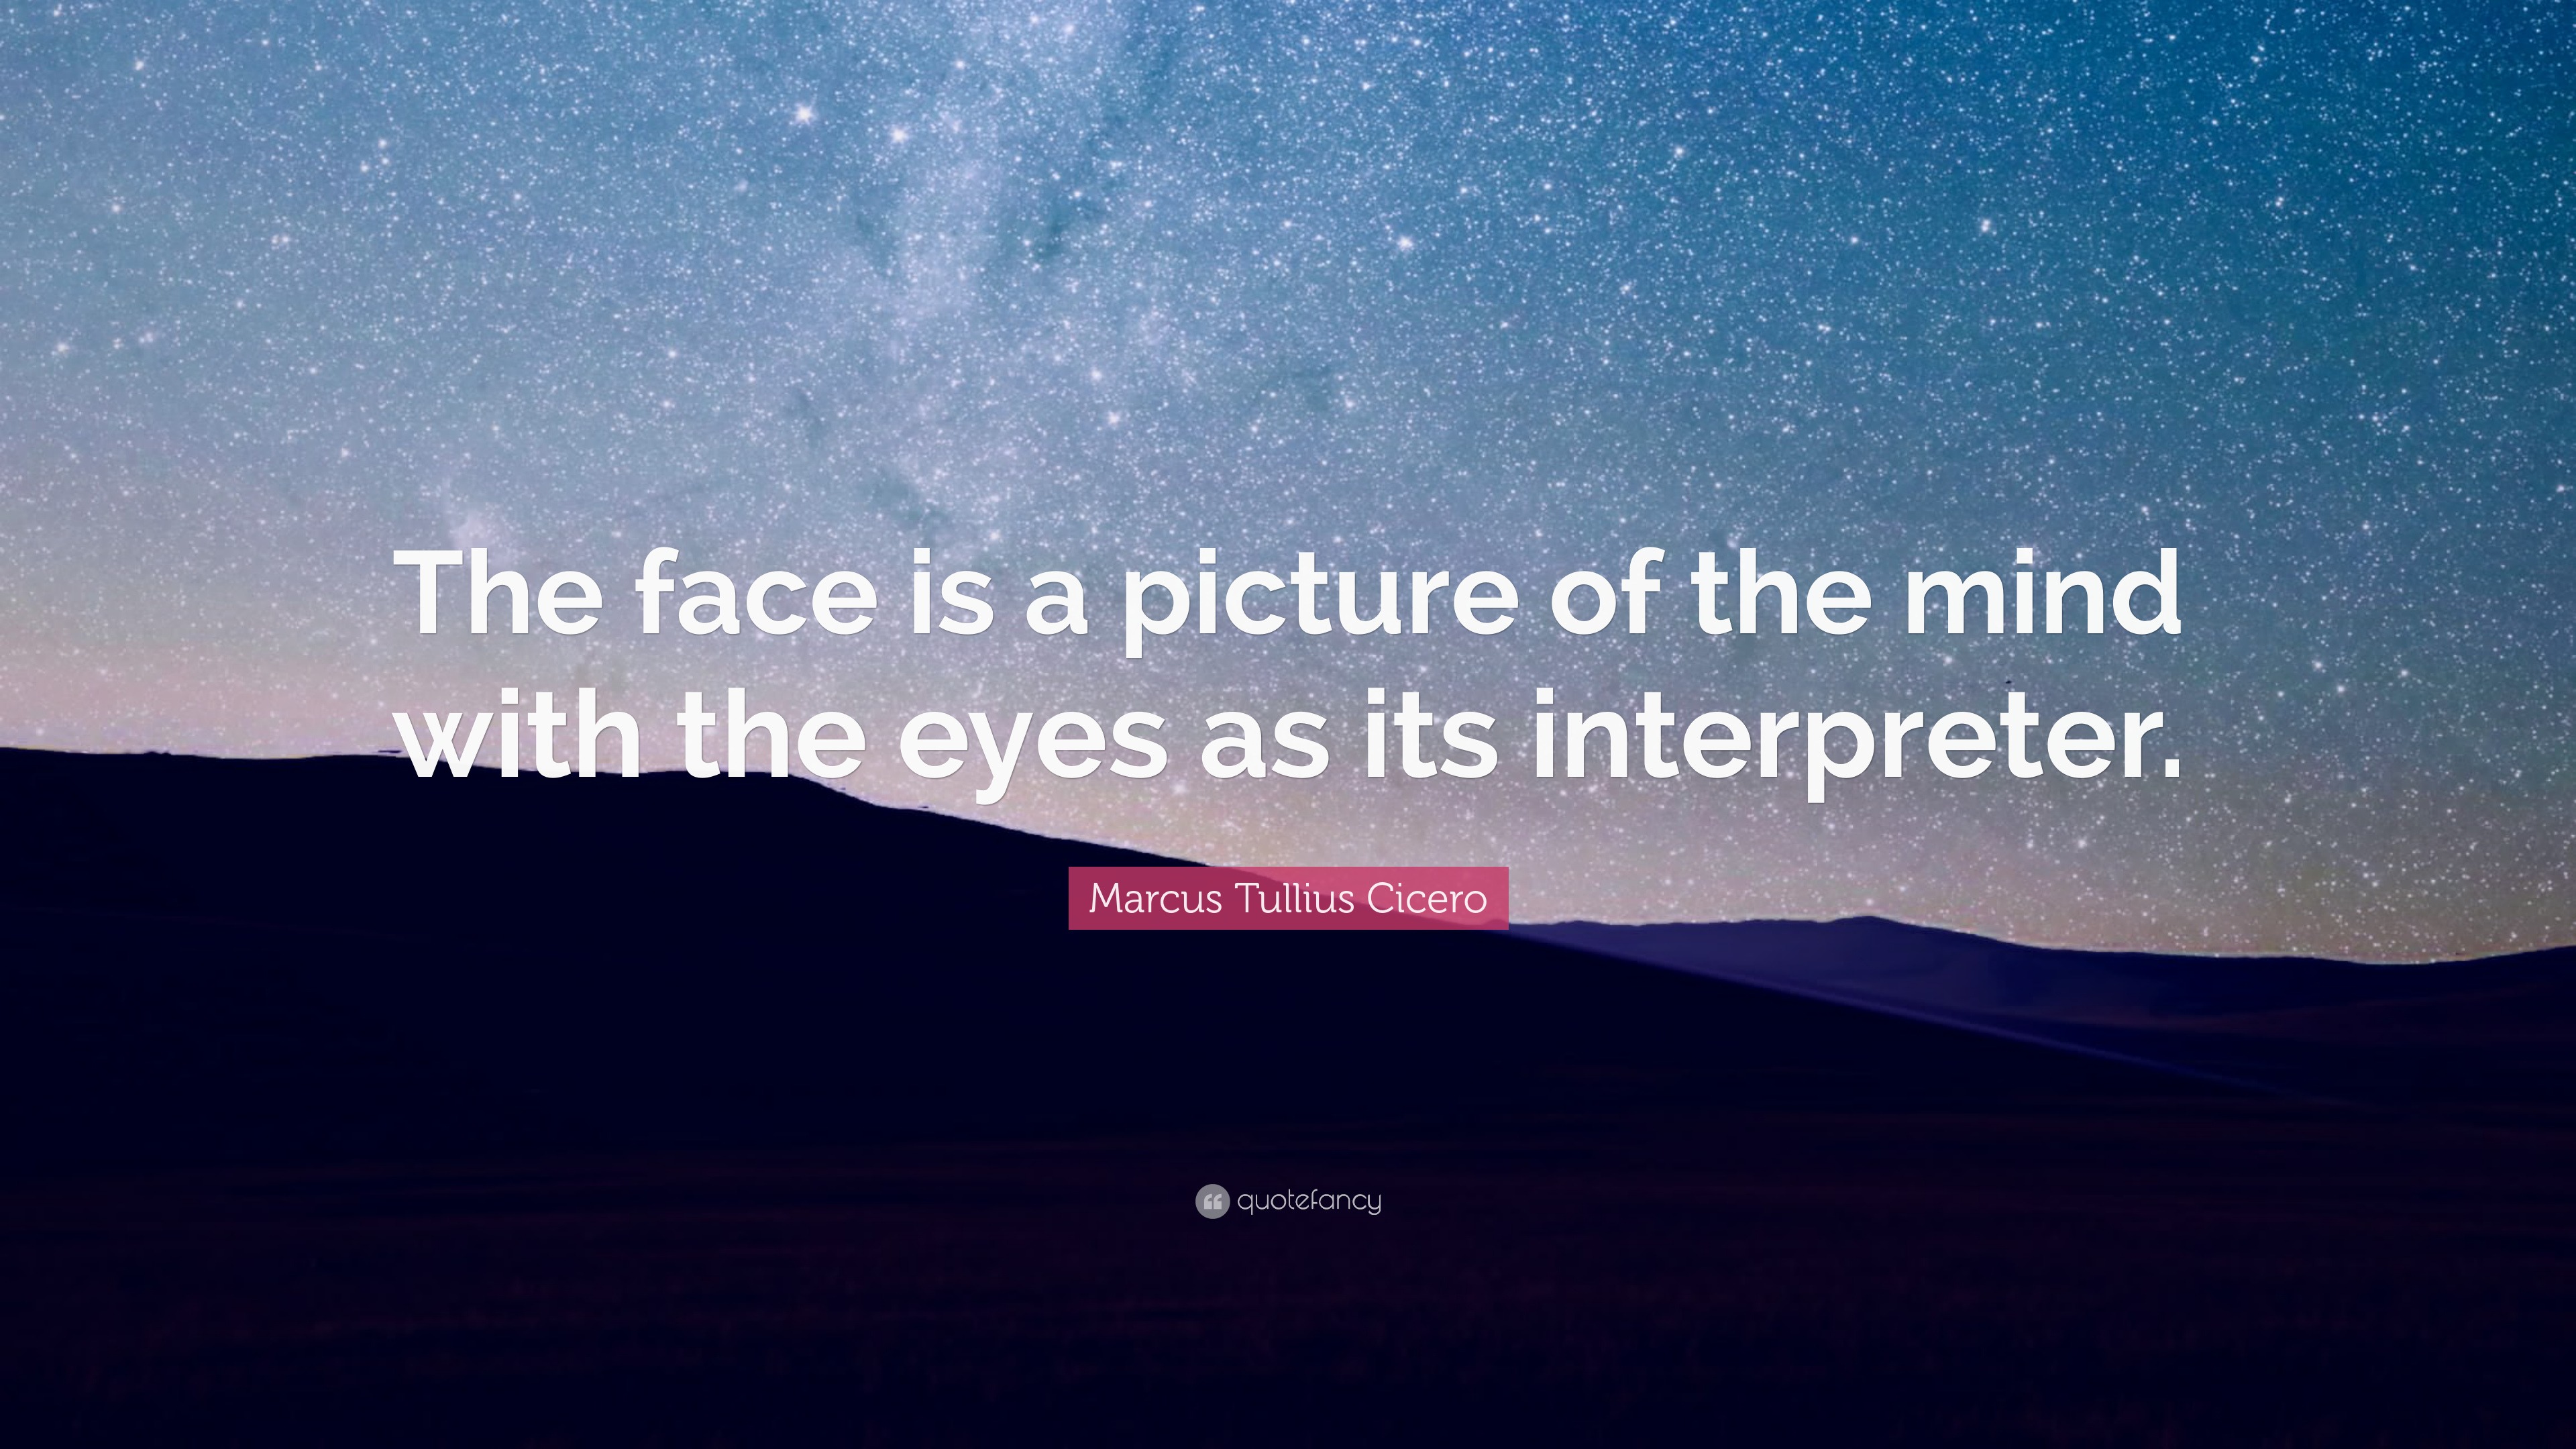 Marcus Tullius Cicero Quote: “The face is a picture of the mind with ...